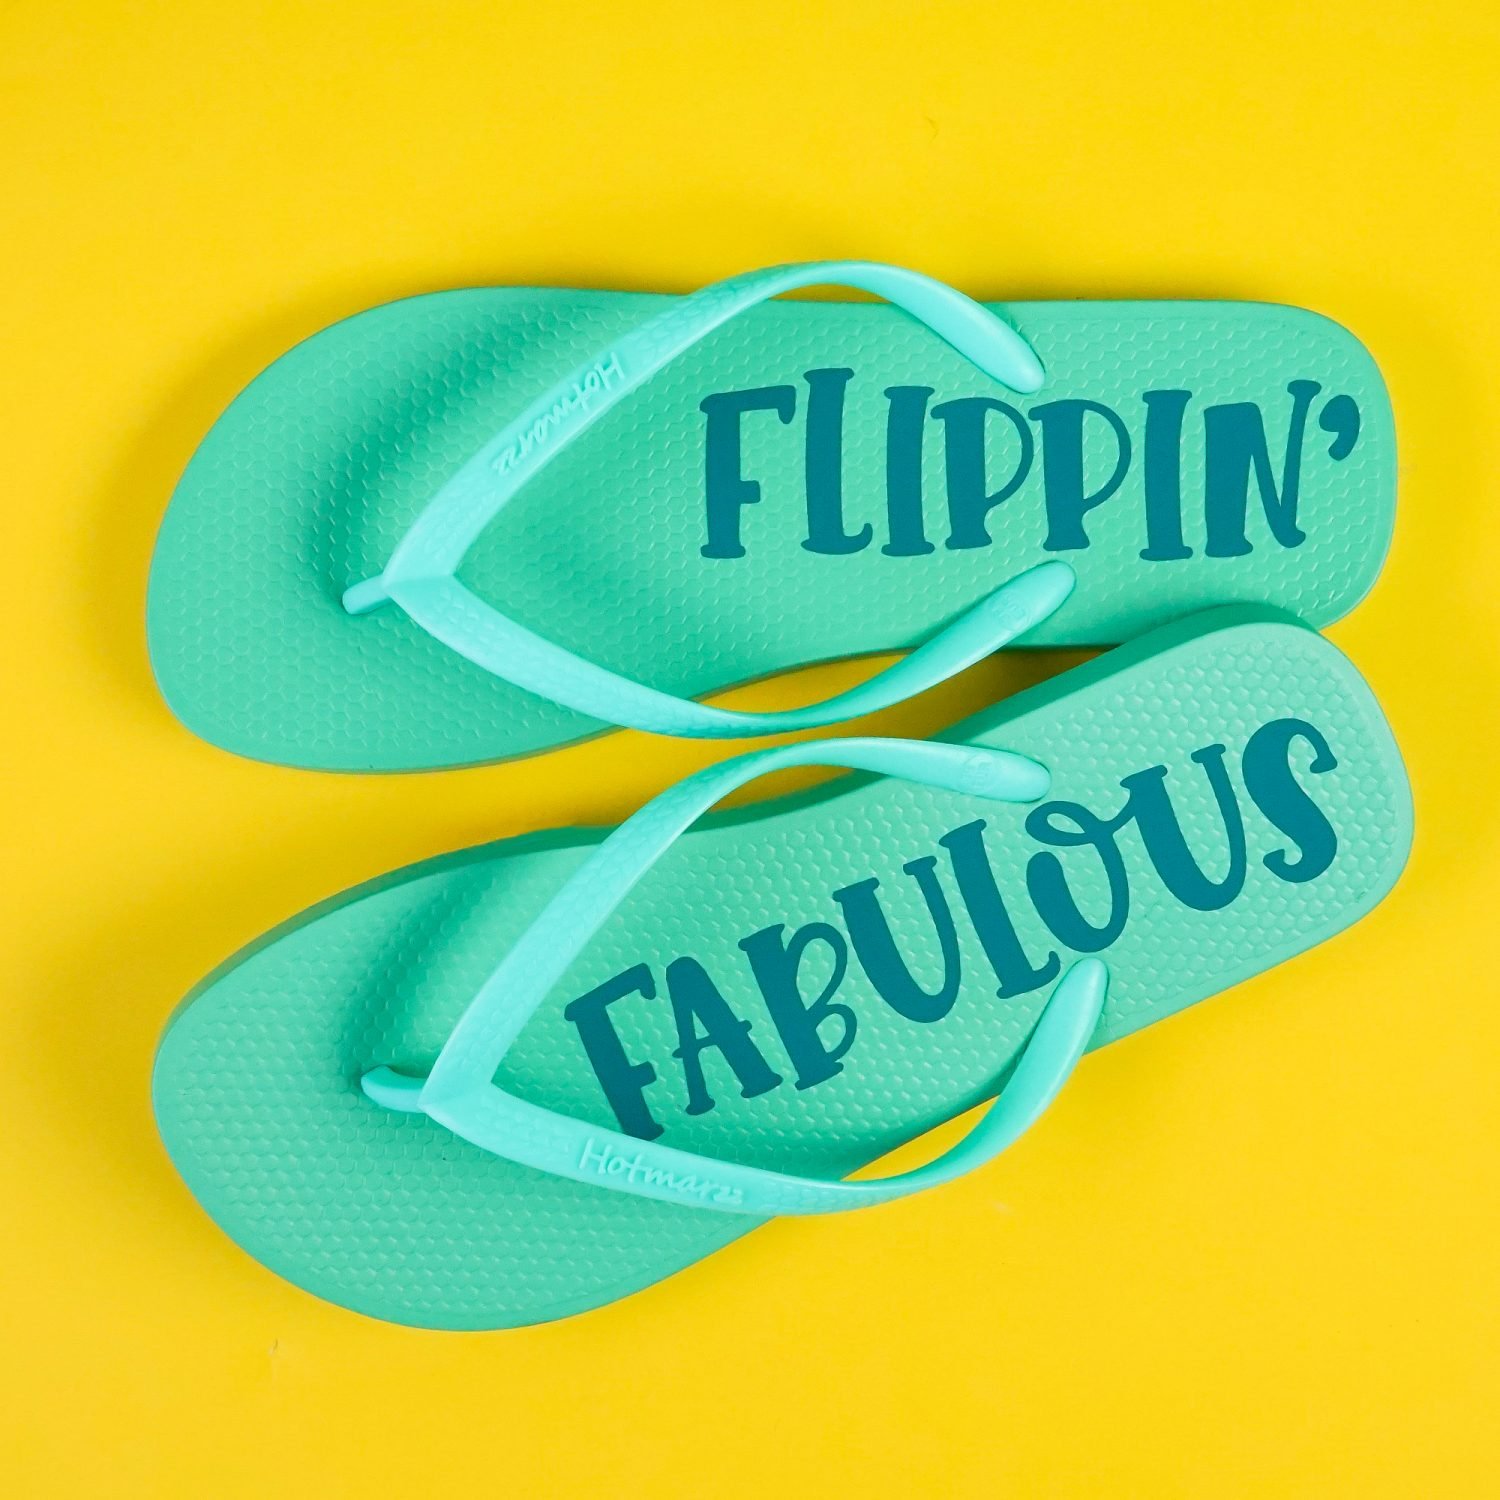 Finished flip flops on yellow background.